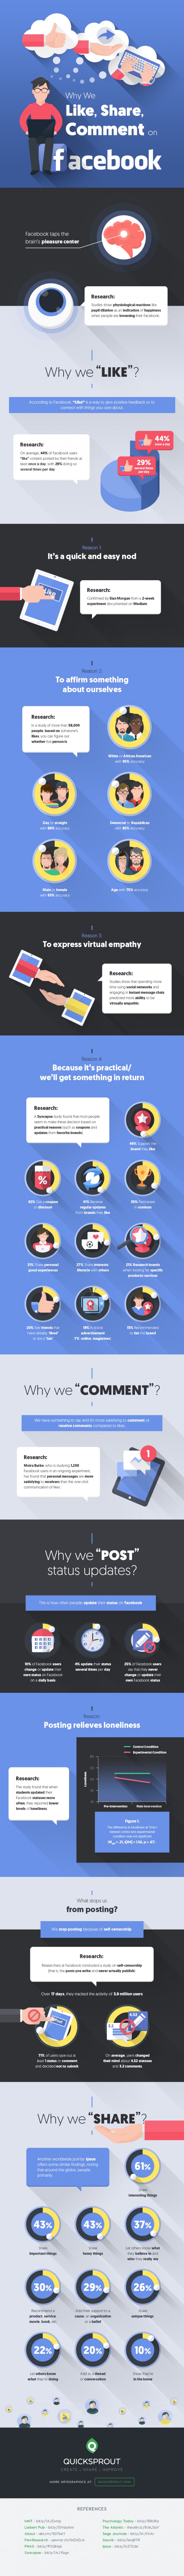 Infographie 217 - why we like on Faacebook